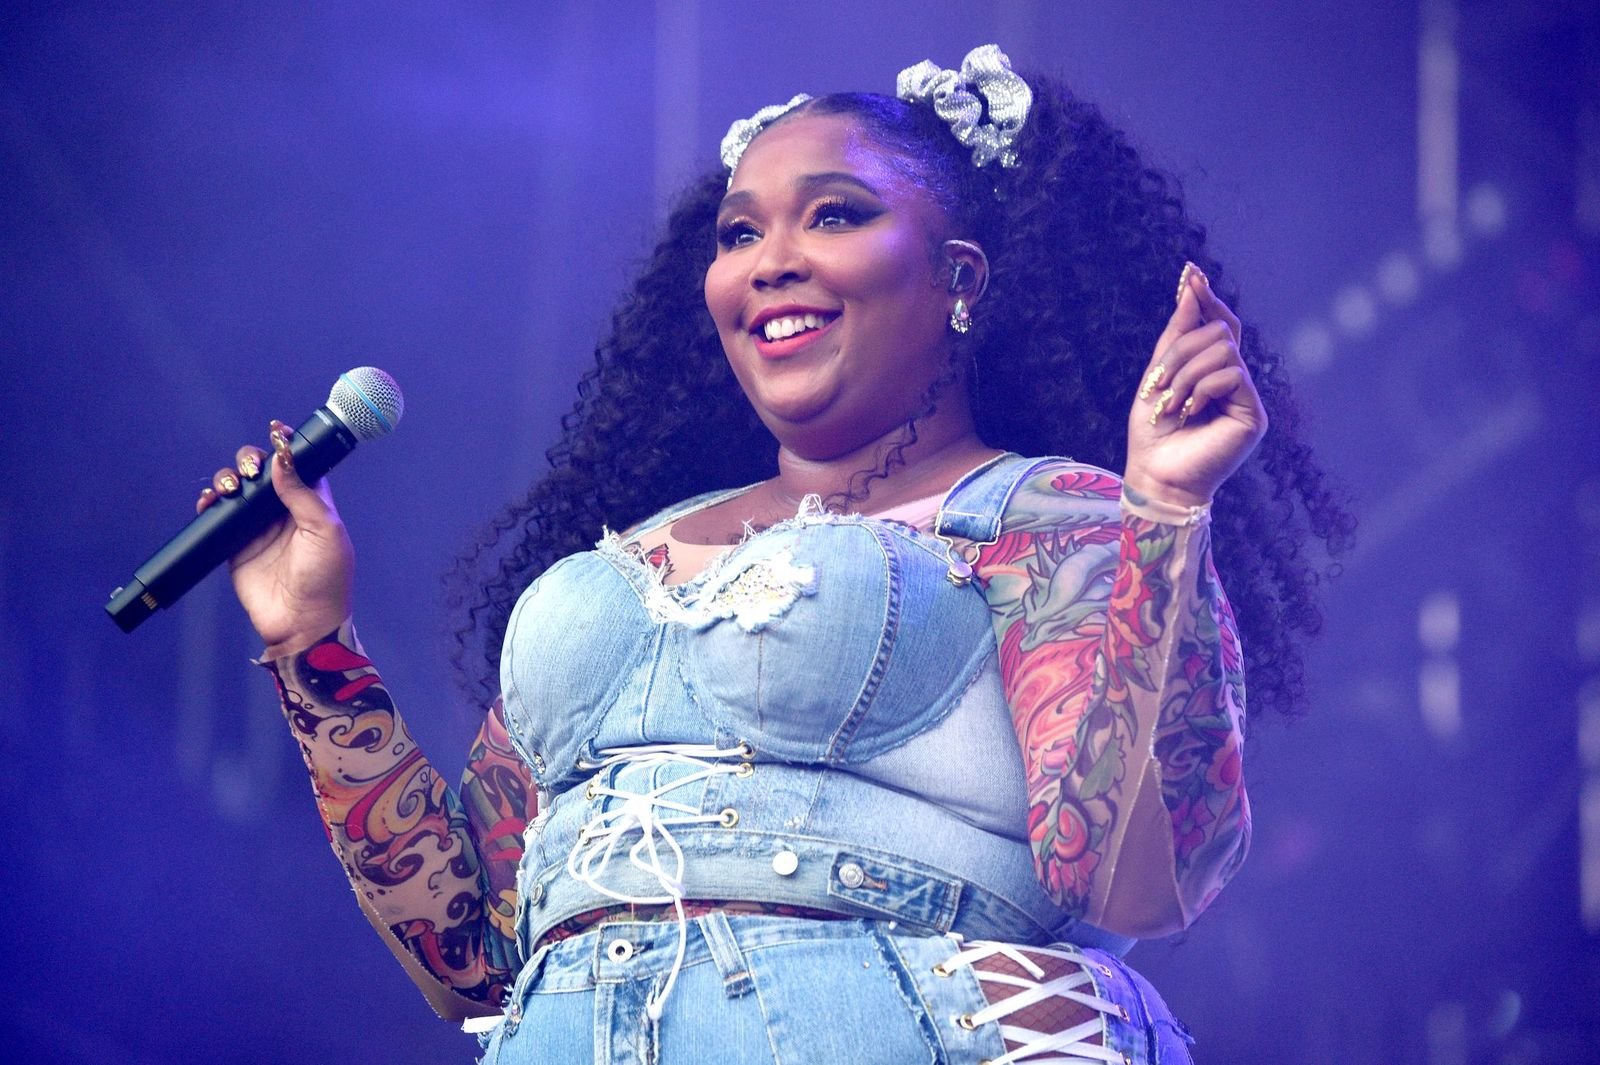 Lizzo performs onstage during Made In America at Benjamin Franklin Parkway on September 1, 2019, in Philadelphia, Pennsylvania | Photo: Kevin Mazur/Getty Images